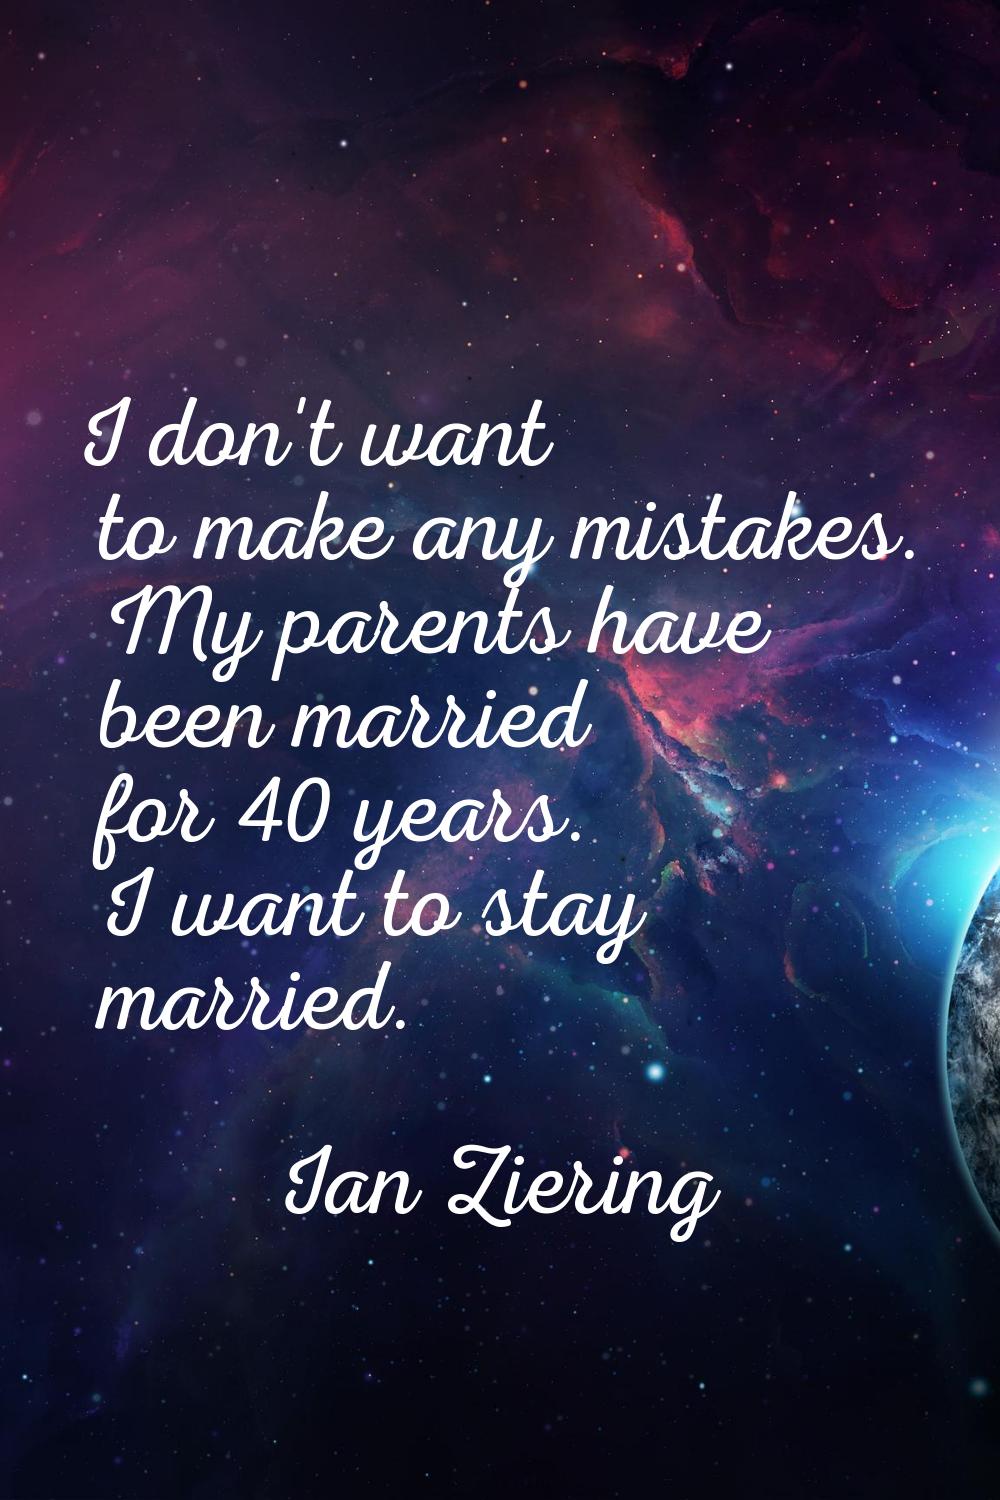 I don't want to make any mistakes. My parents have been married for 40 years. I want to stay marrie